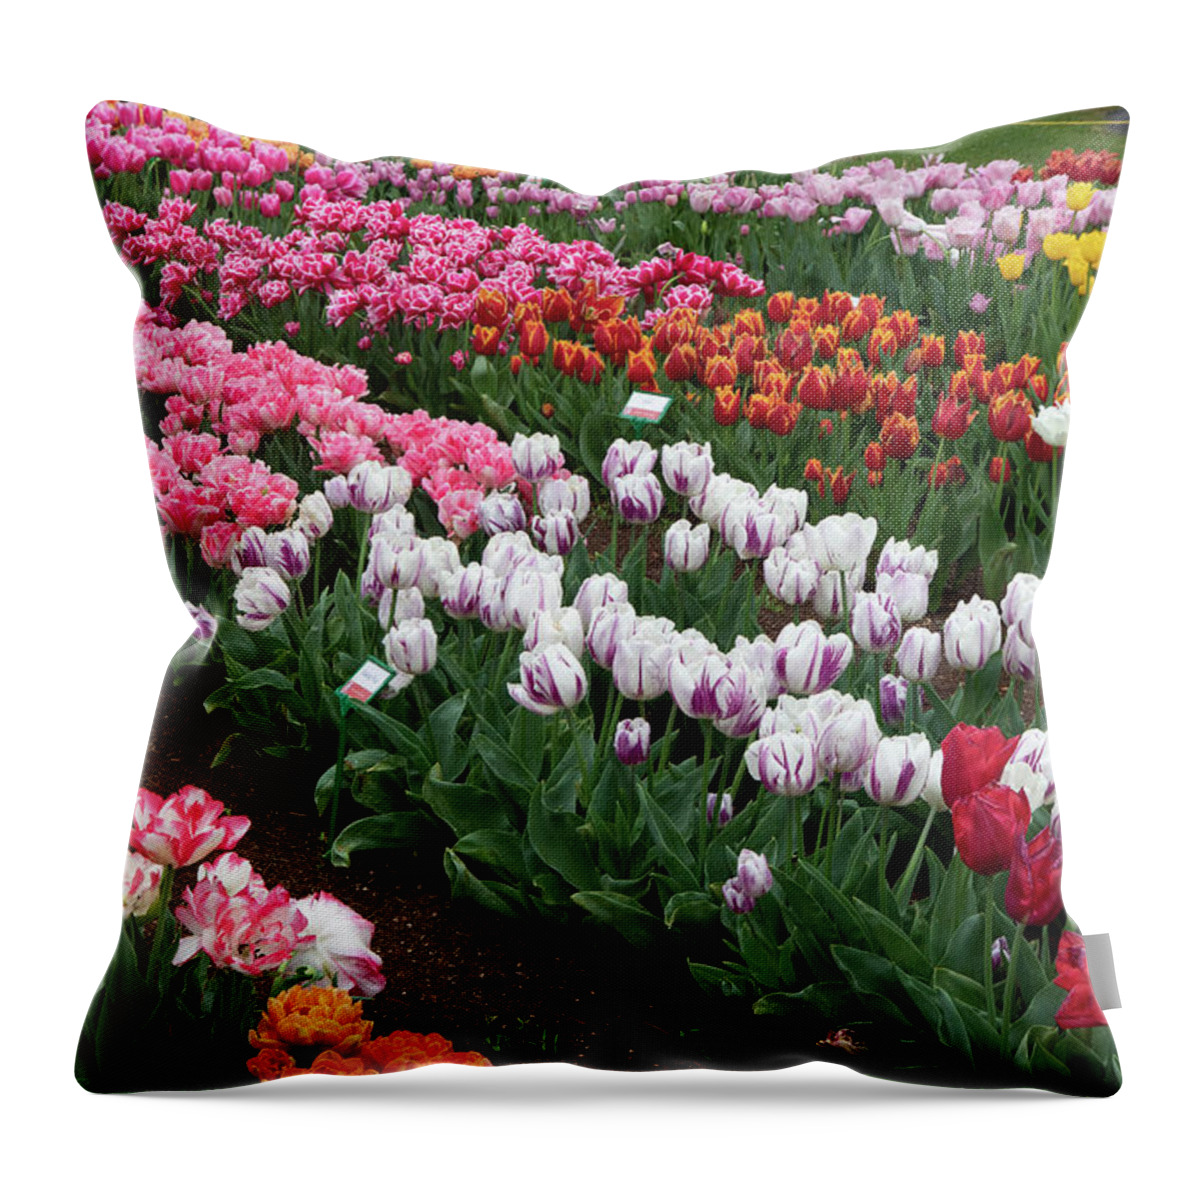 Flower Throw Pillow featuring the photograph Rainy Tulip Festival by Masami IIDA